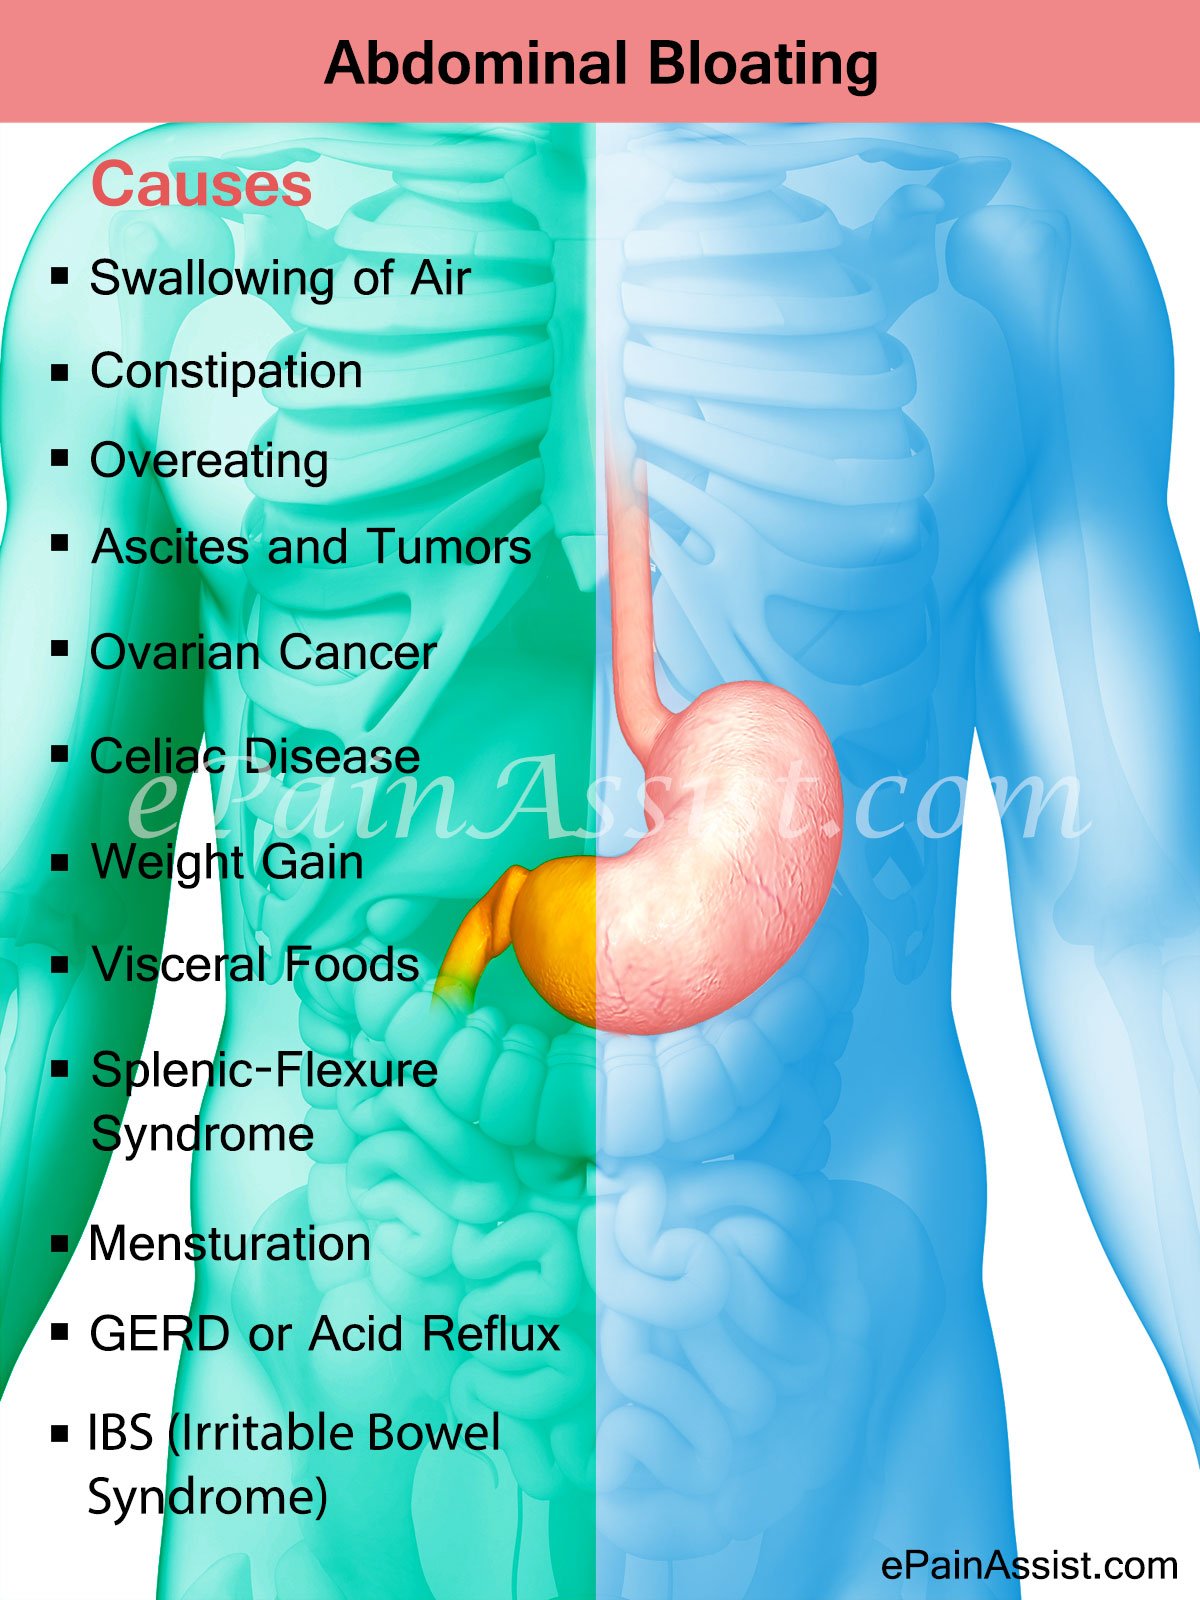 Abdominal Bloating: Home Remedies and Prevention Tips